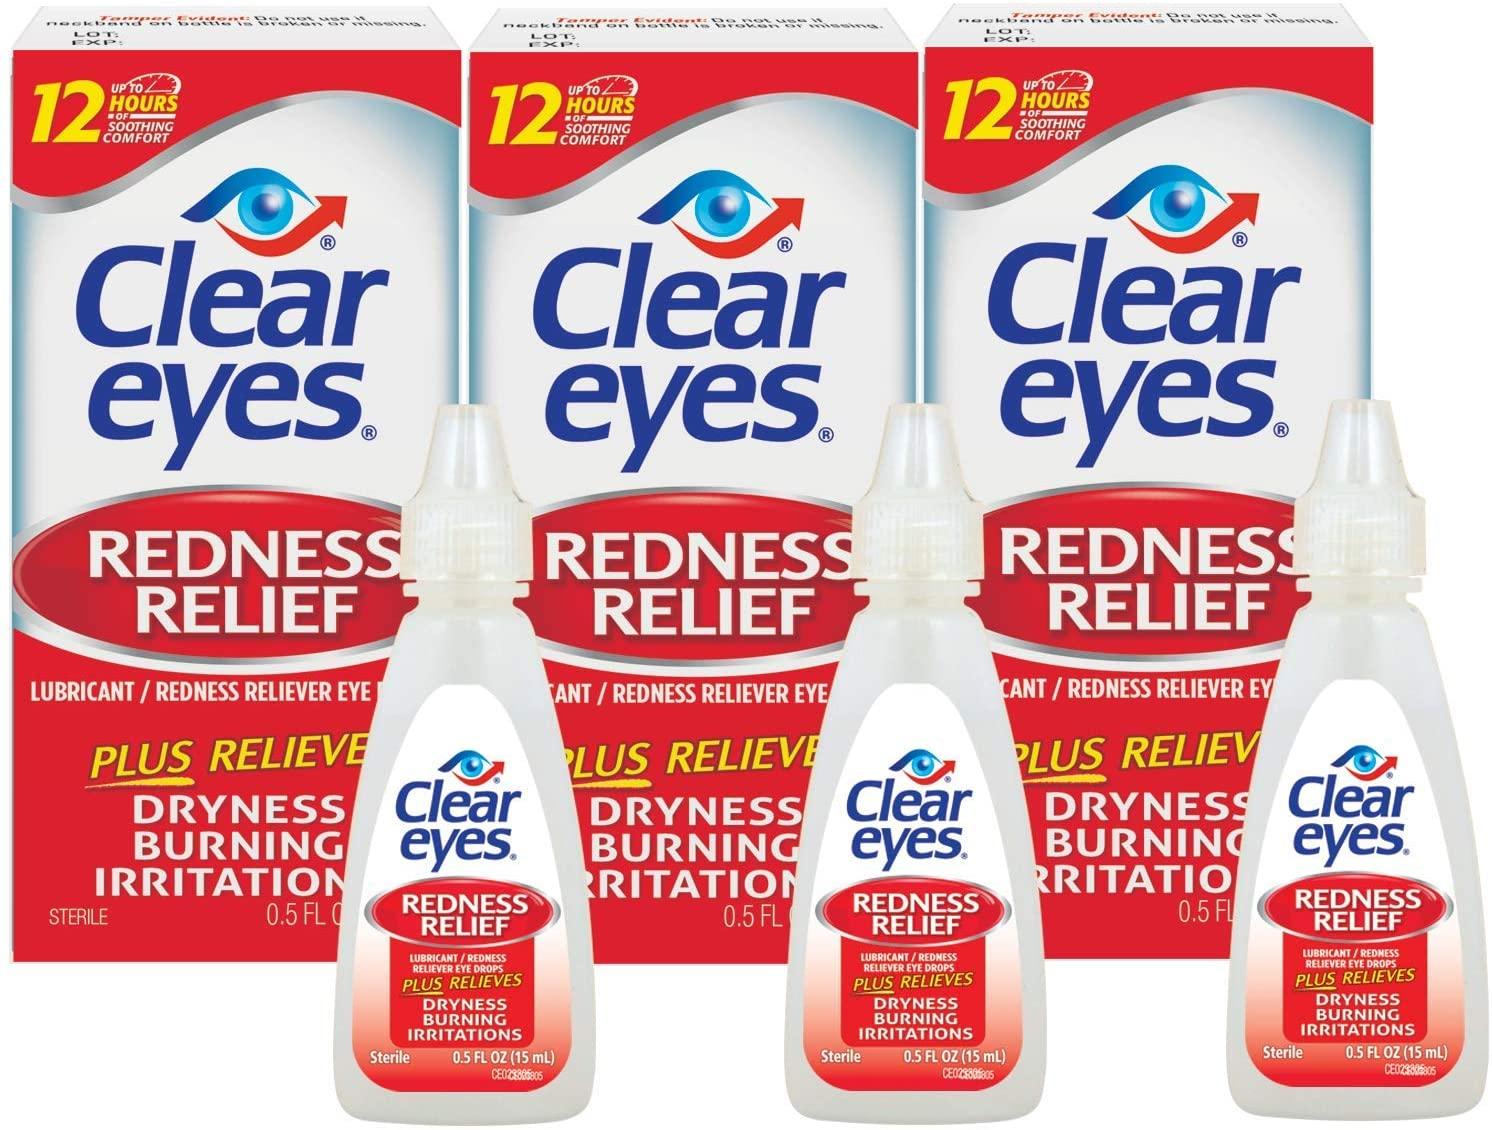 3 Clear Eyes Redness Relief Eye Drops for $5.92 Shipped